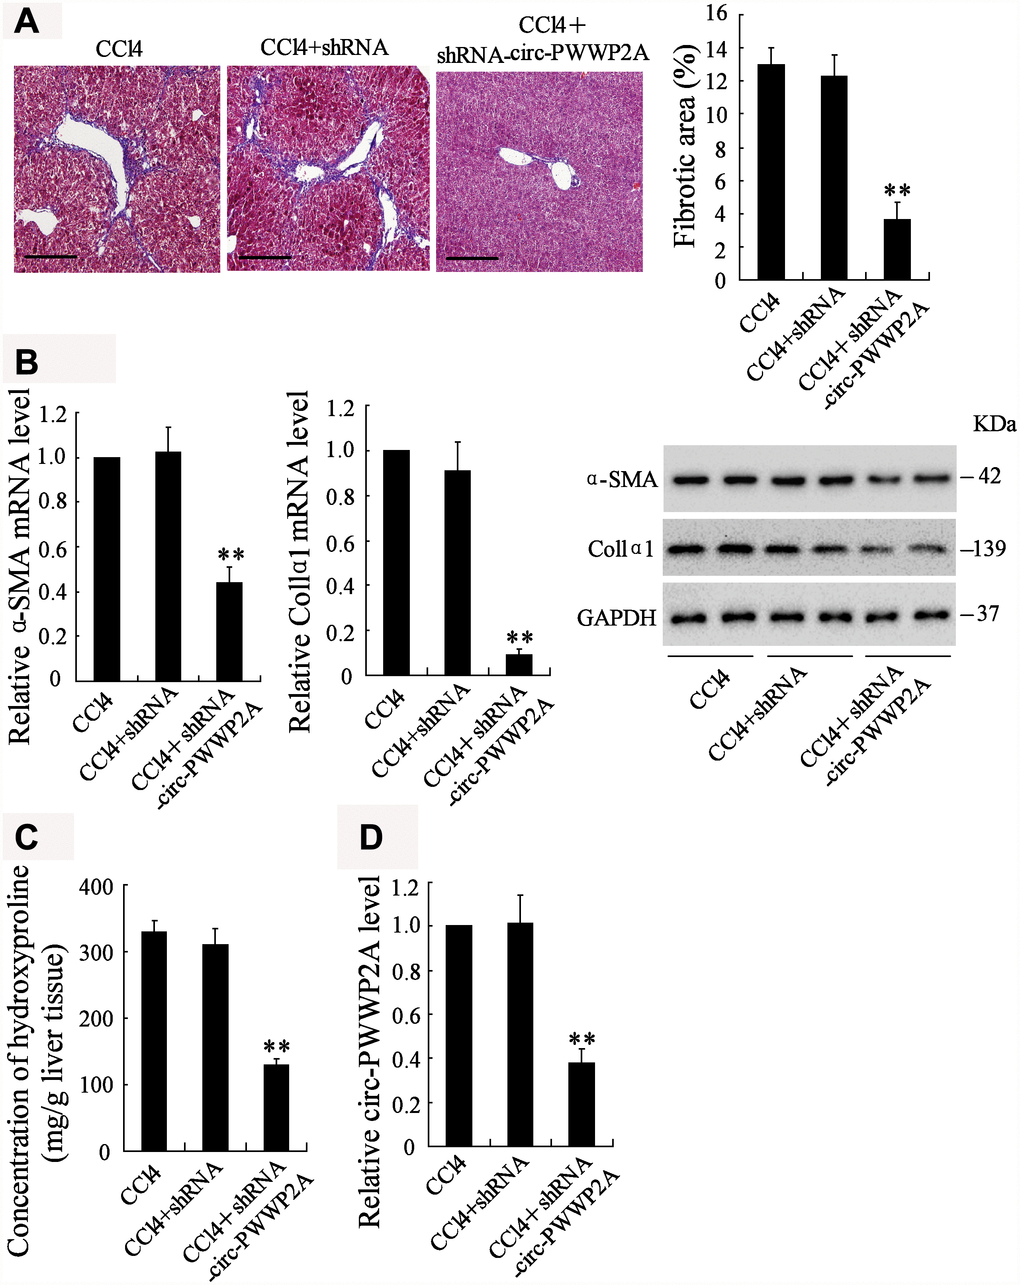 Downregulating circ-PWWP2A alleviates hepatic fibrosis in vivo. The adeno-associated virus carrying shRNA of circ-PWWP2A was injected into the CCl4-induced fibrosis mice at the third week of CCl4 injection. (A) Liver tissues from the CCl4 group (n=7), the CCl4+shRNA group (n=7), and the CCl4+shRNA-circ-PWWP2A group (n=7) were collected for HE staining, and the percentage of fibrotic area was calculated. Magnification is 400X. Scale bar represents 200 μM. (B) The mRNA and protein expressions of α-SMA and Col1α1. (C) The concentration of hydroxyproline (D) The expression of circ-PWWP2A. **p4+shRNA. shRNA, short hairpin RNA.